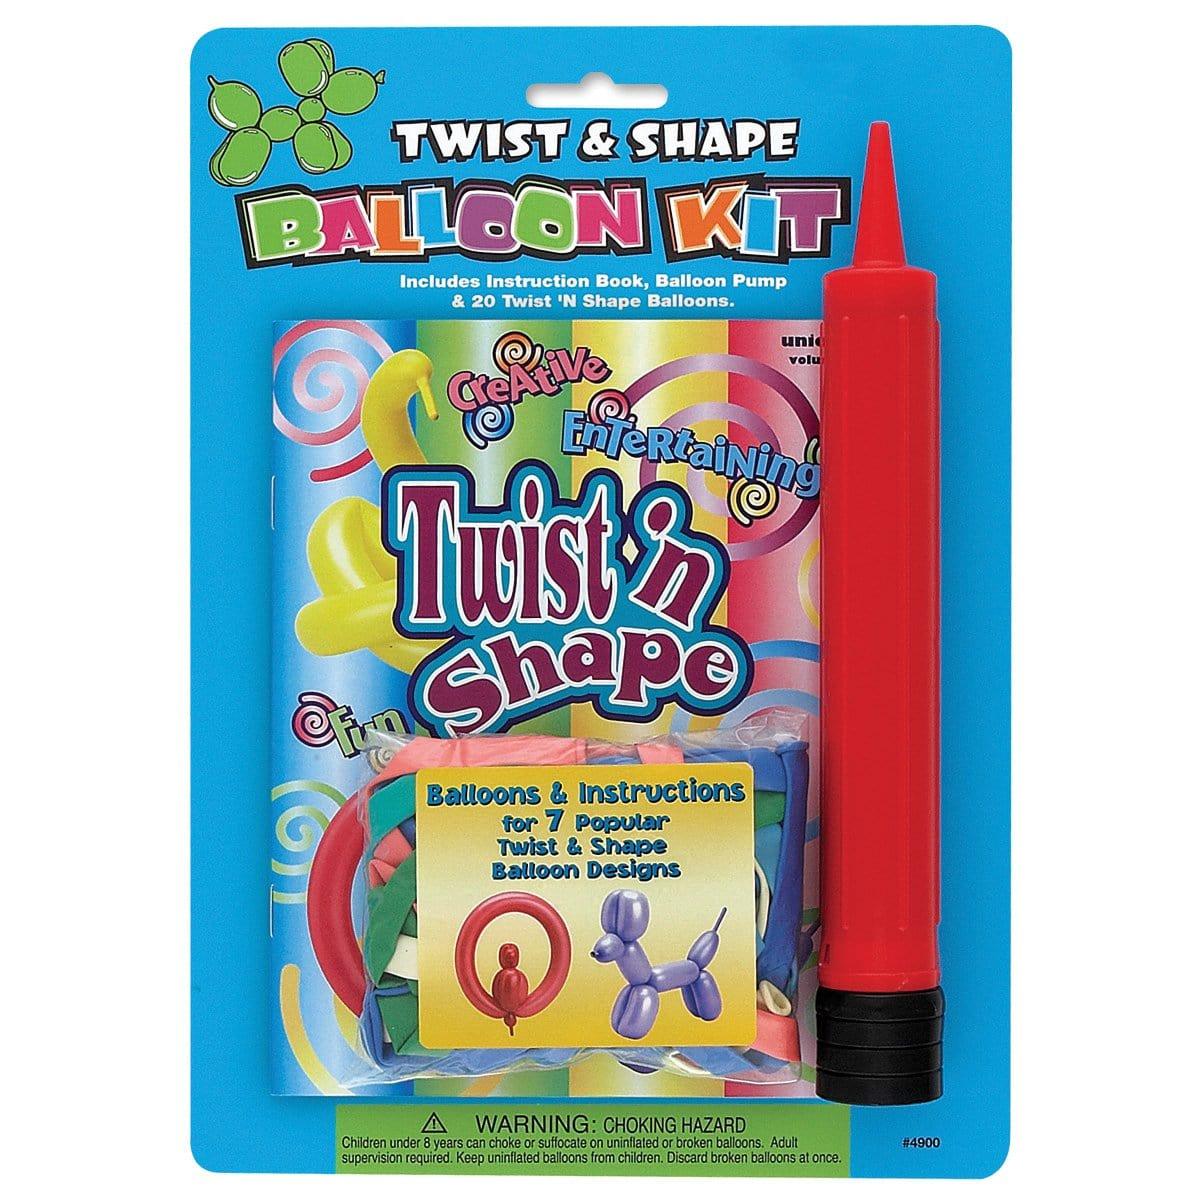 Buy Balloons Twist & Shape Balloon Kit sold at Party Expert